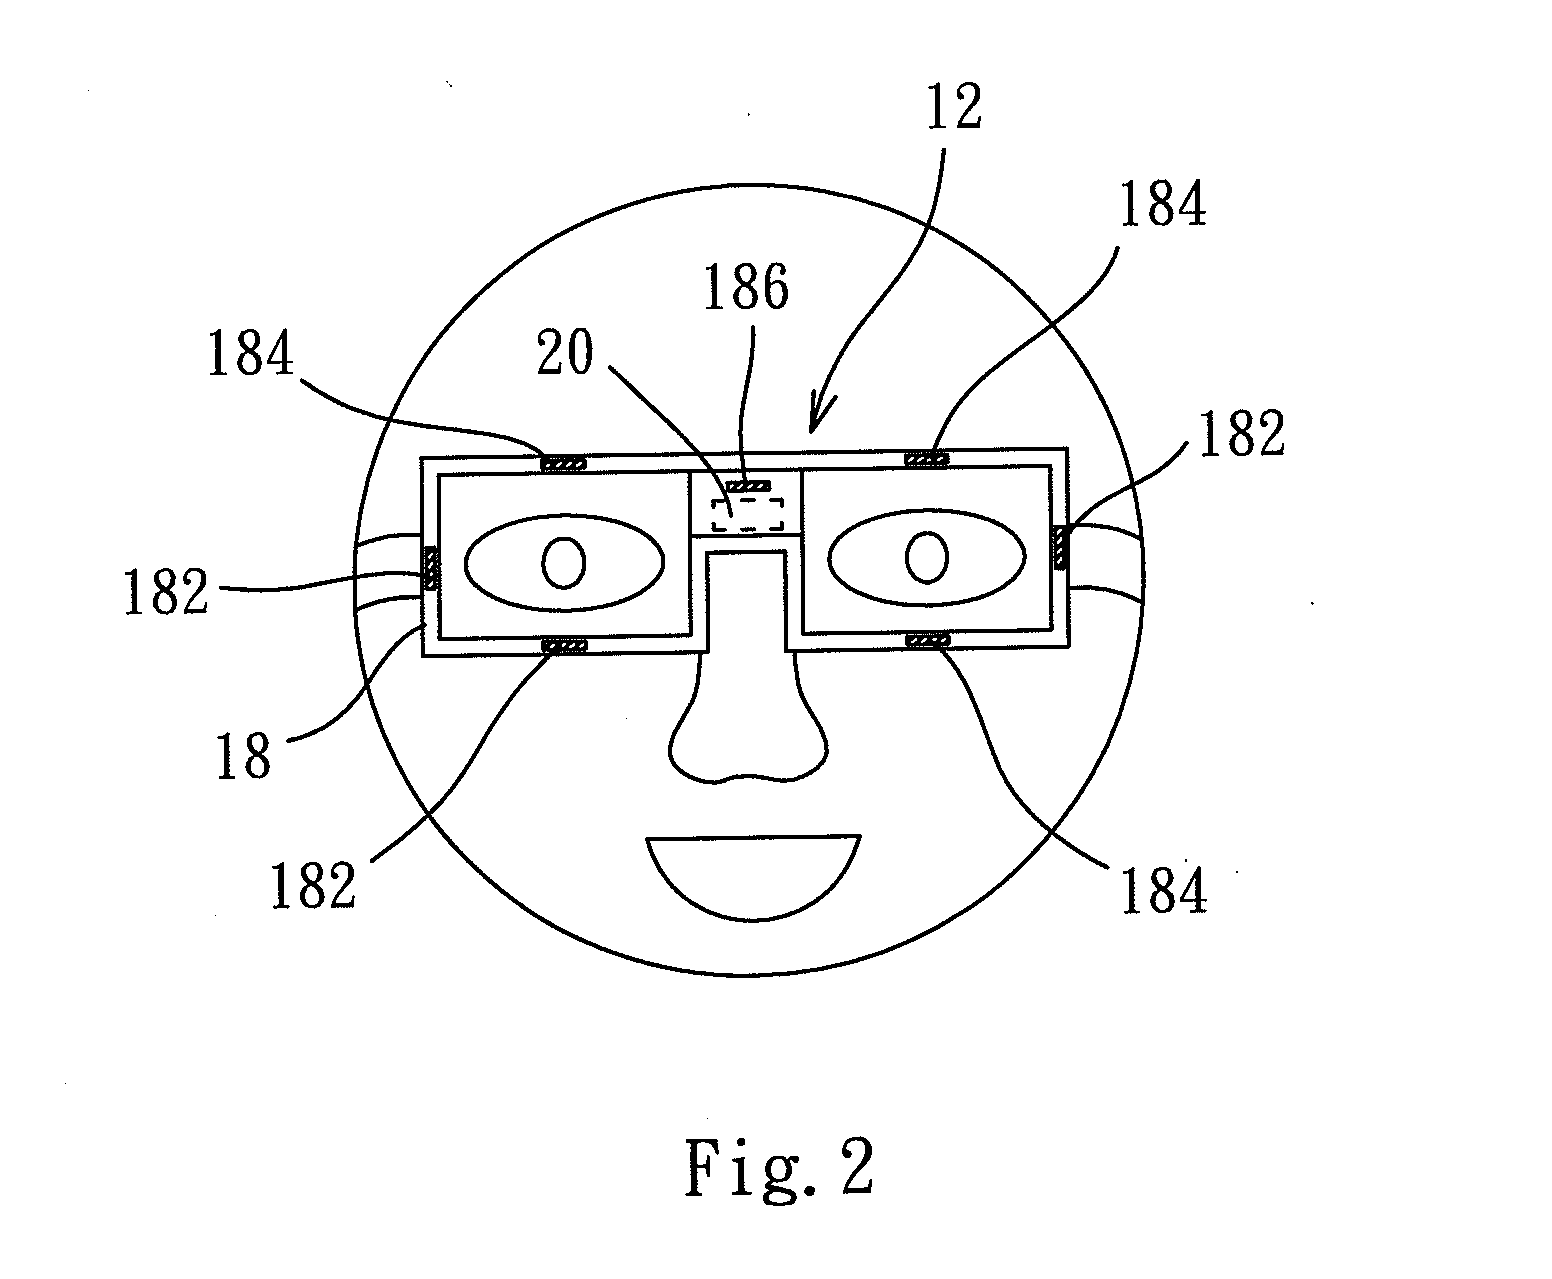 Image control system able to detect electrooculography